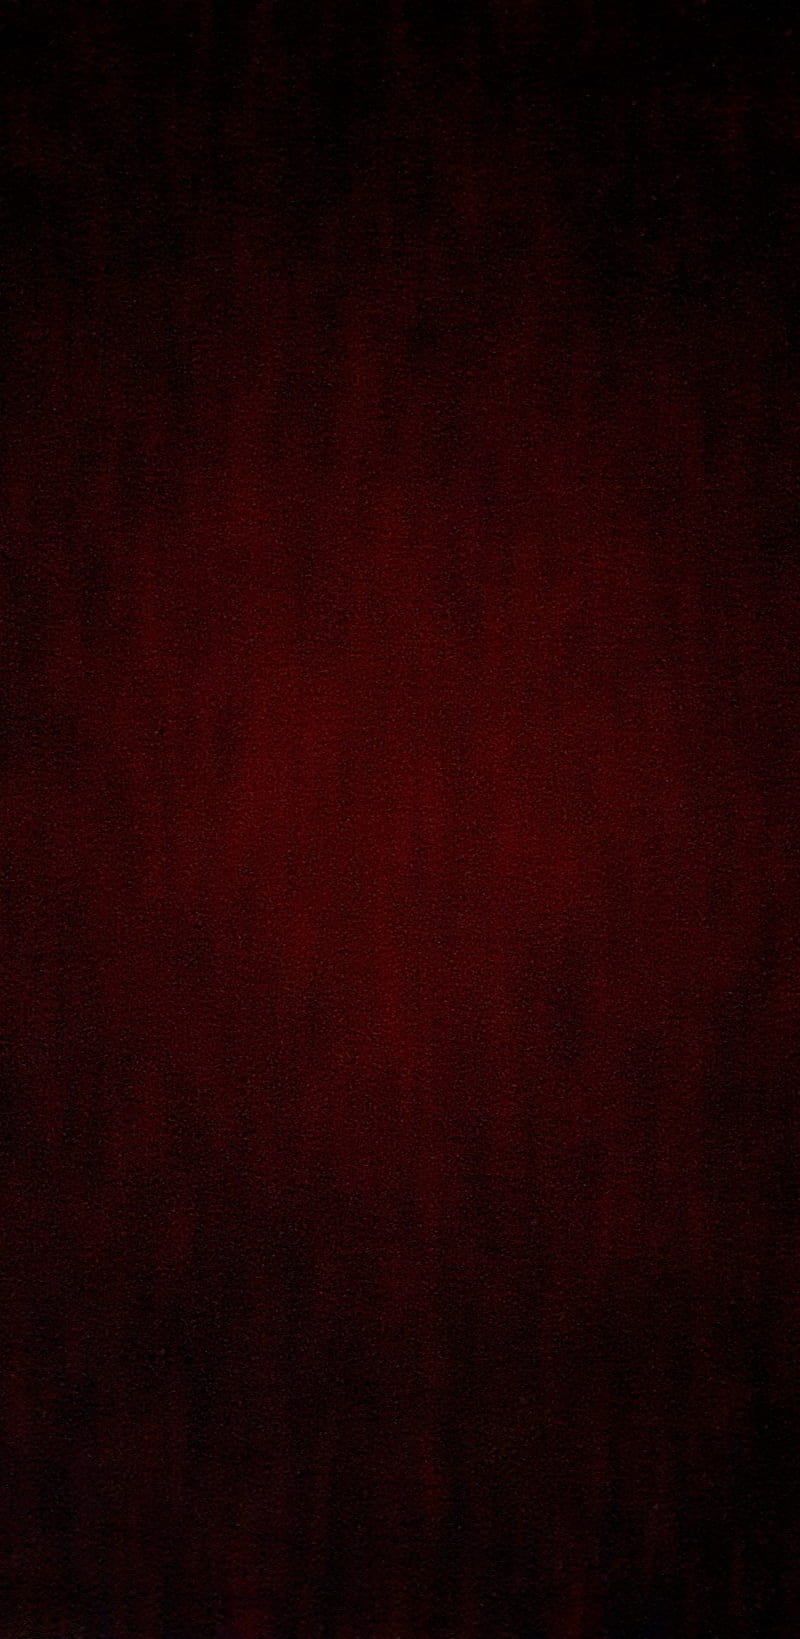 Wallpaper Dark Red 2021 IMac Color Matching Wallpaper for IPhone Background   Download Free Image